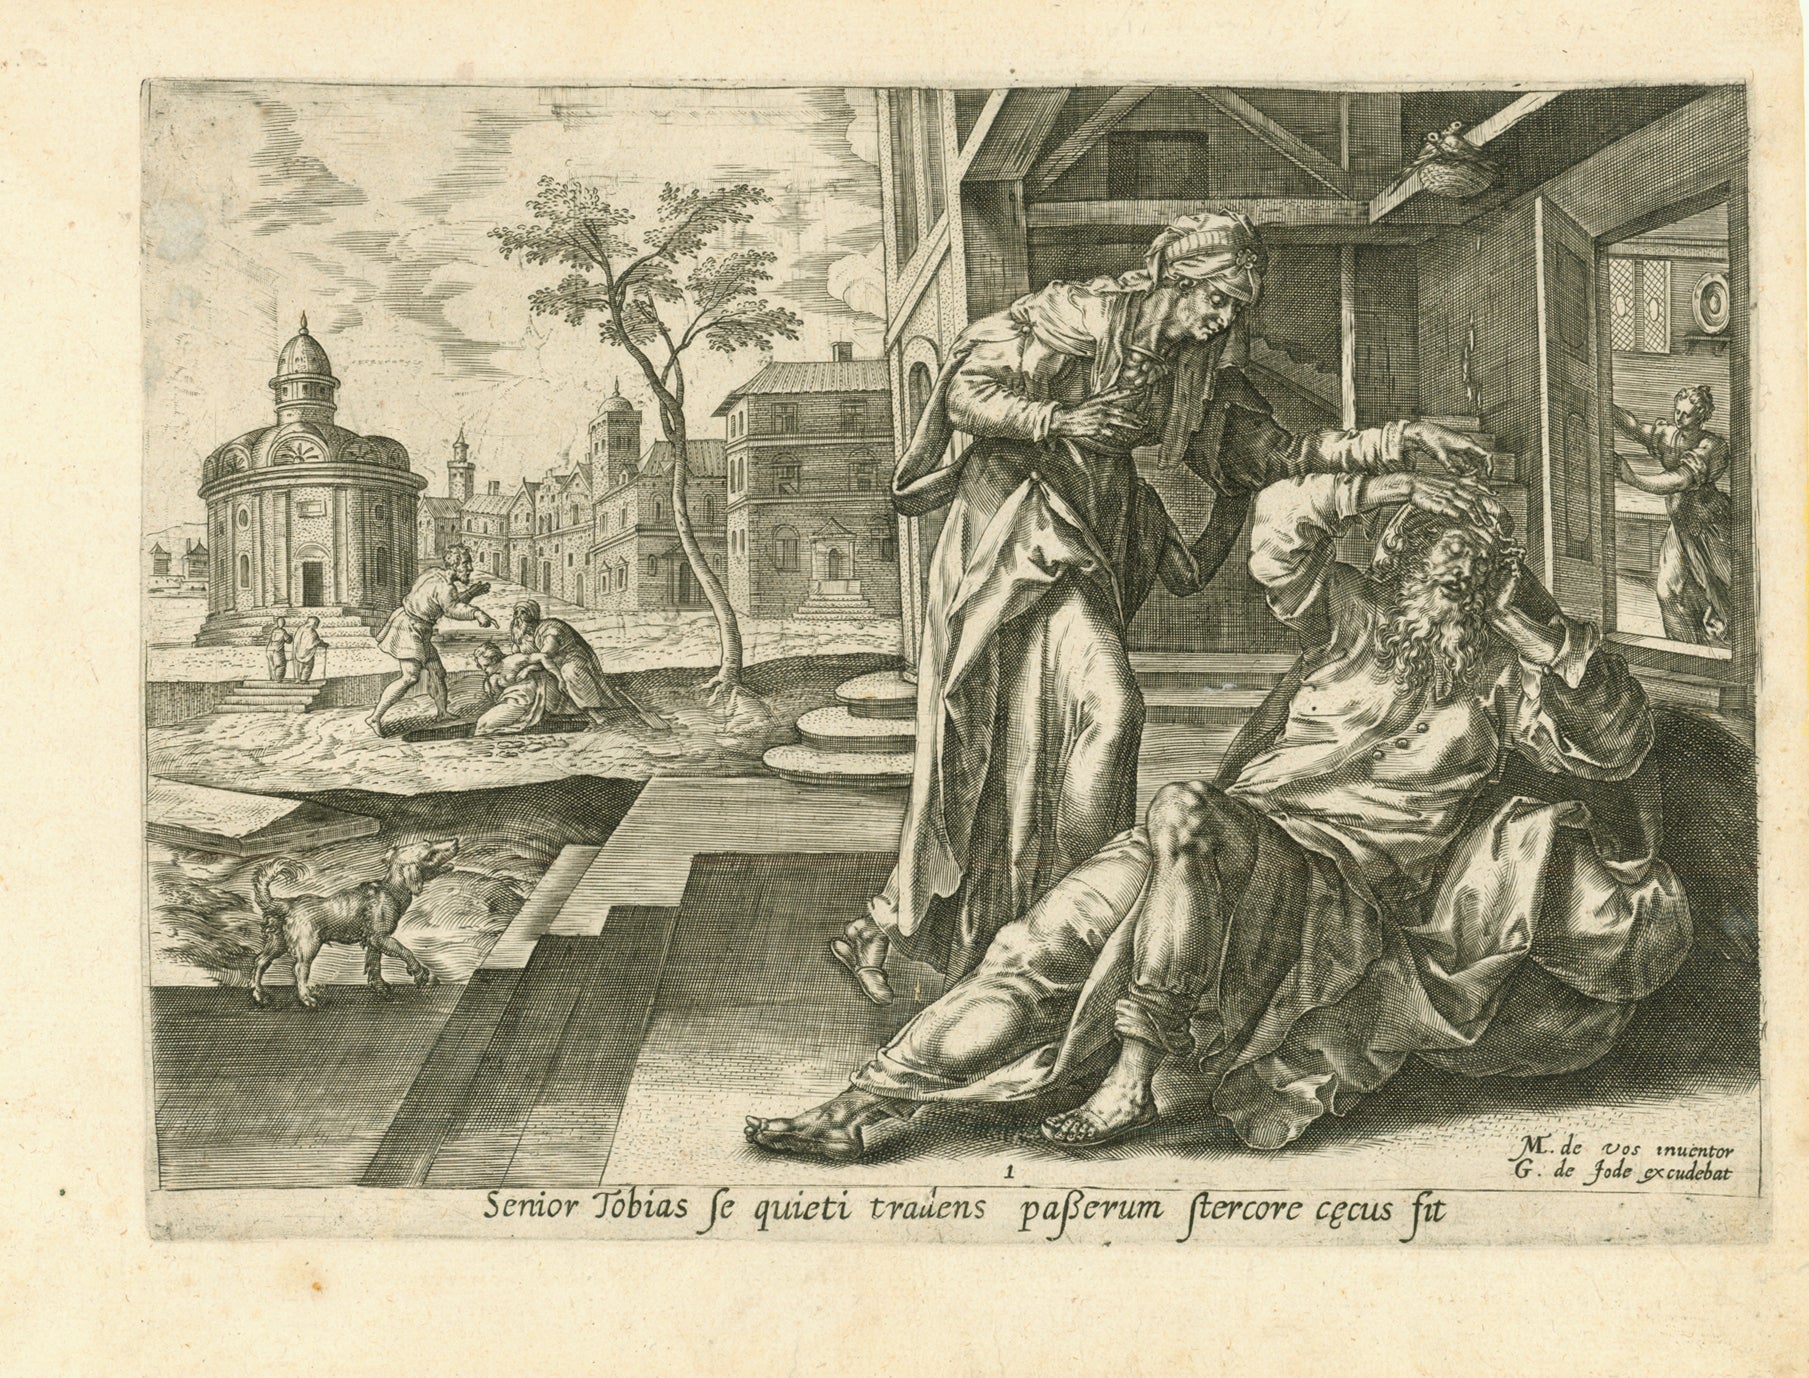 Tobias blinded by bird droppings  Copper etching by Gerard de Jode (1509, possibly 1517-1591)  After the drawing by Marten de Vos (1532-1603)  Published in "History of Tobias" 1582-1585  This are first edition of the series about the life of Tobias was published in the years 1582-1585. Gerard de Jode was the engraver. A second edition was engraved by Nicolaes Visscher (1618-1679). It is the Visscher series which is more frequently found.  Lower right: M. de Vos inventor. And below: G. de Jode excudebat.